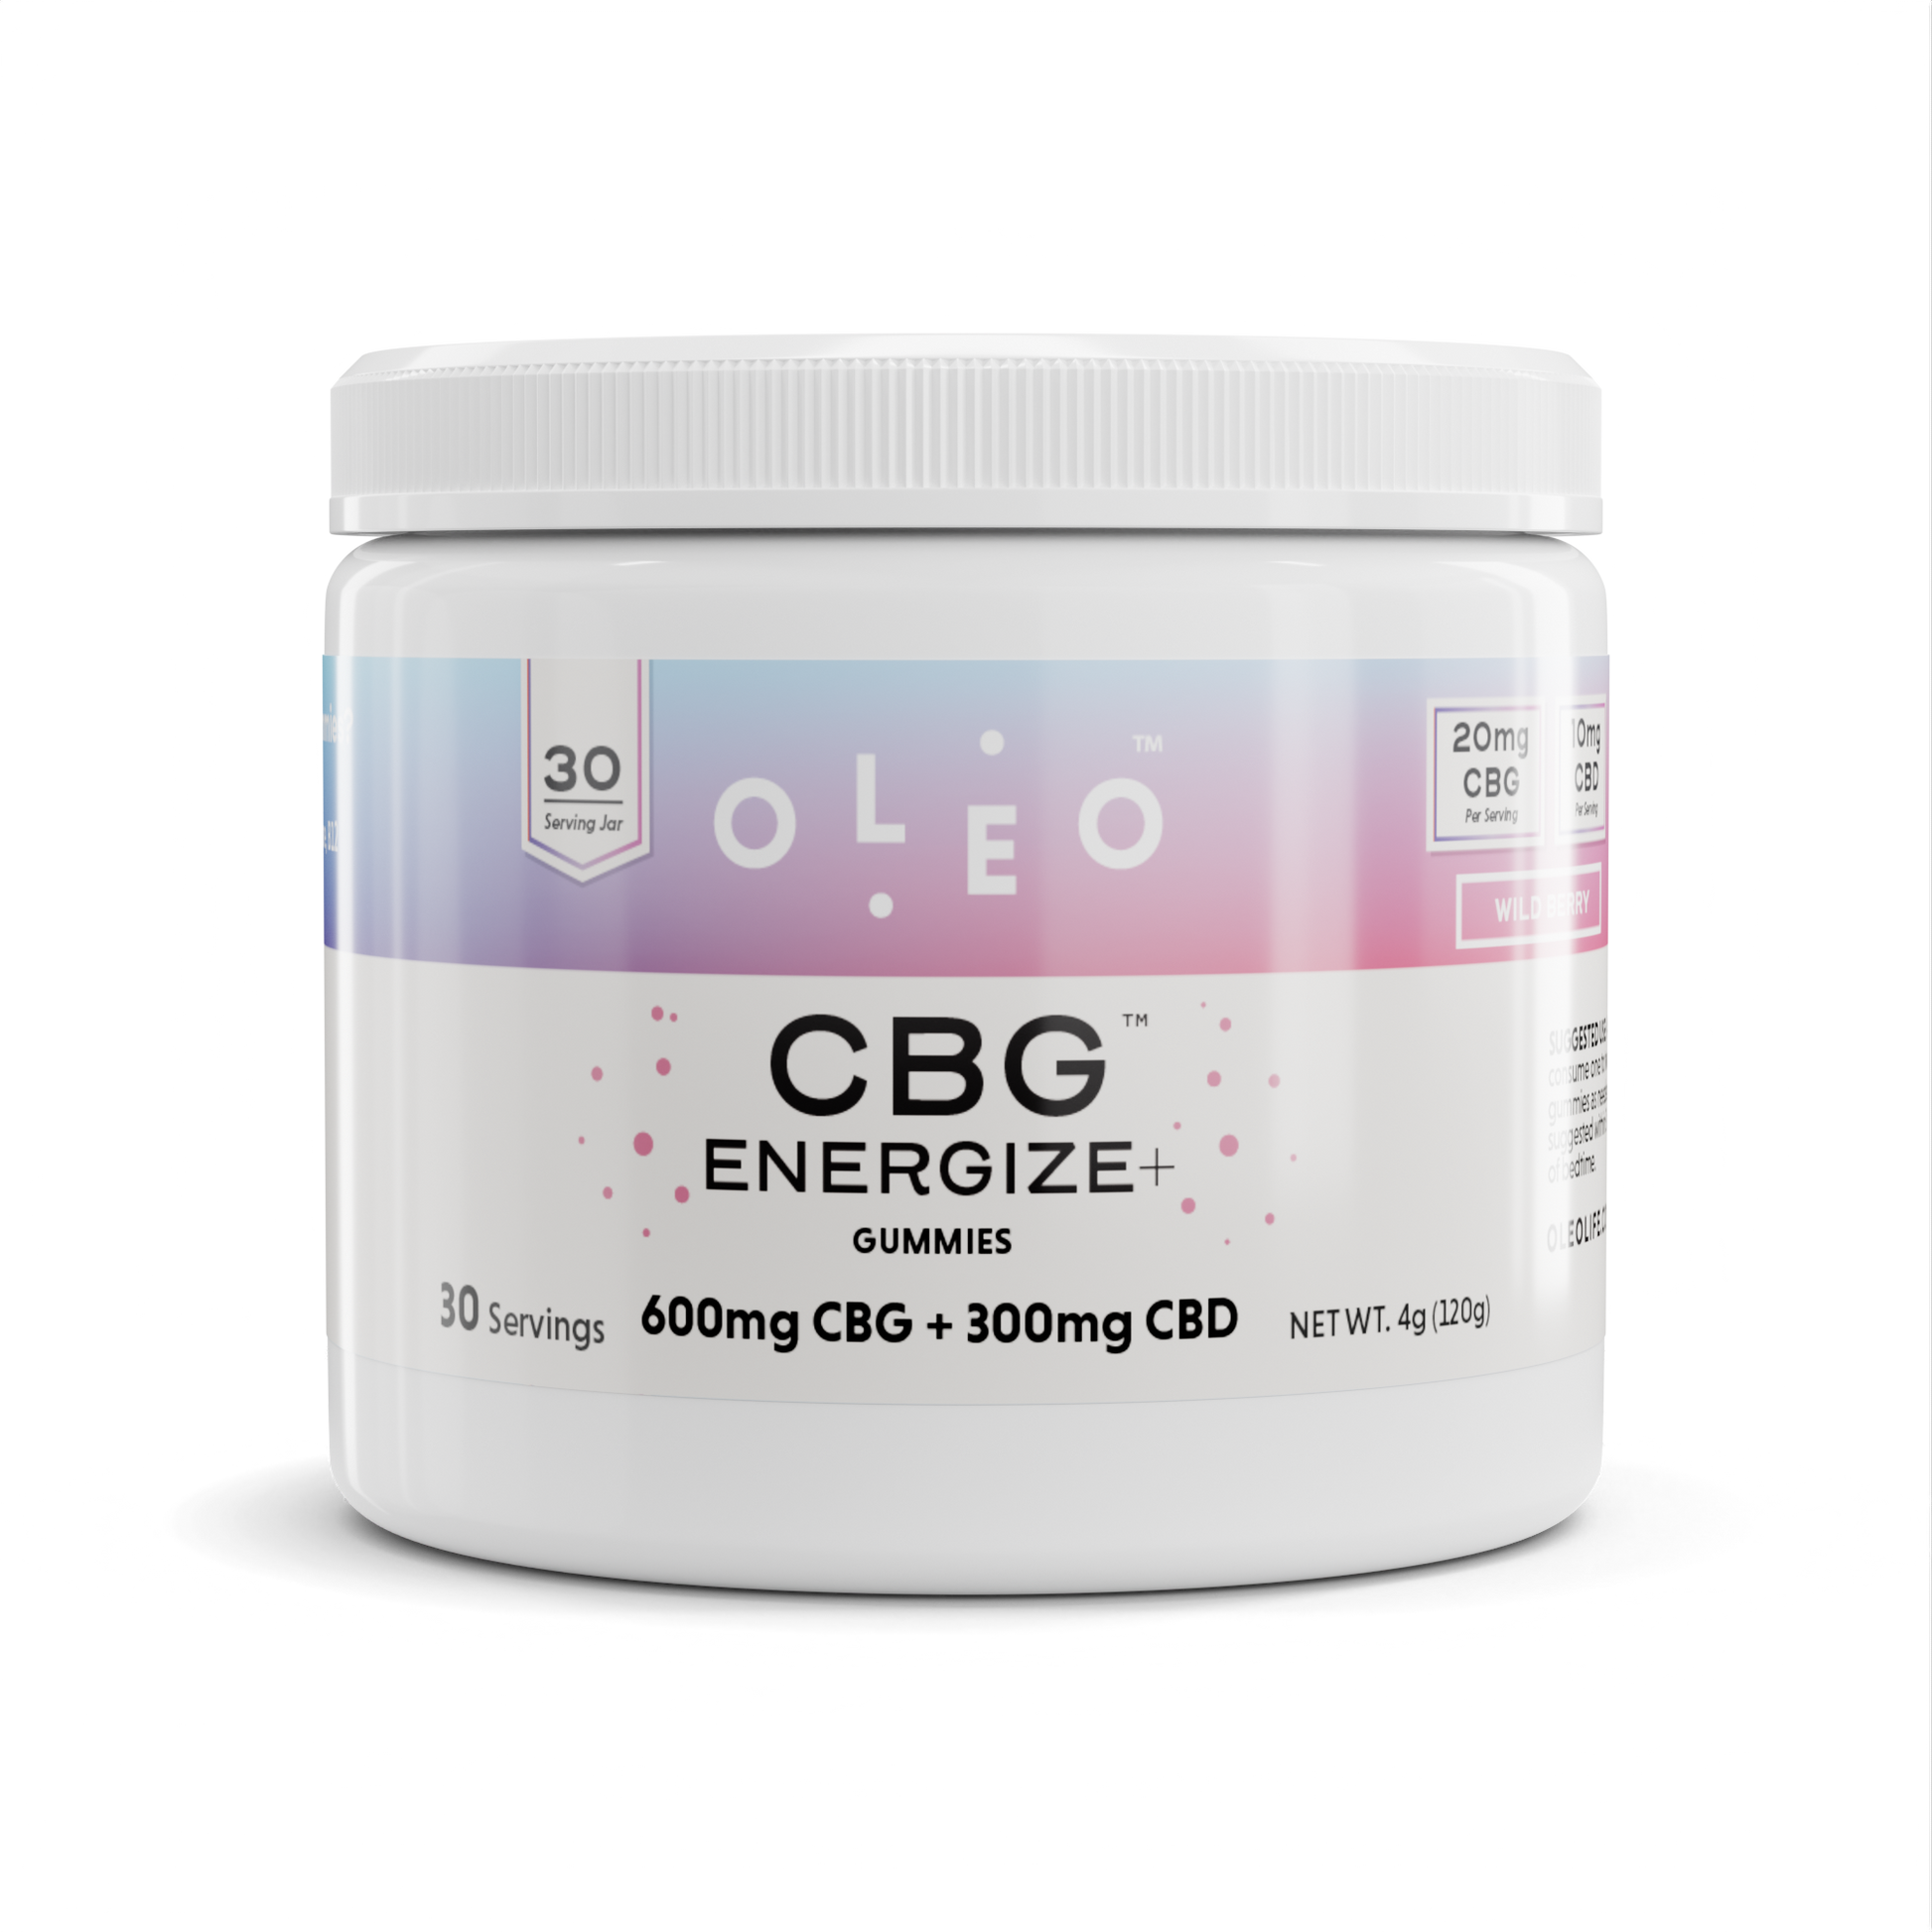 OleoLife CBD Energize Gummies: Get a natural energy boost and feel focused with 20mg CBG, 10mg CBD, Lion's Mane, Ginseng, and B12 vitamins in each gummy. Non-GMO, vegan, and free of THC.  #FocusSupplement #PlantBased #NaturalEnergy #VeganWellness #CBD 